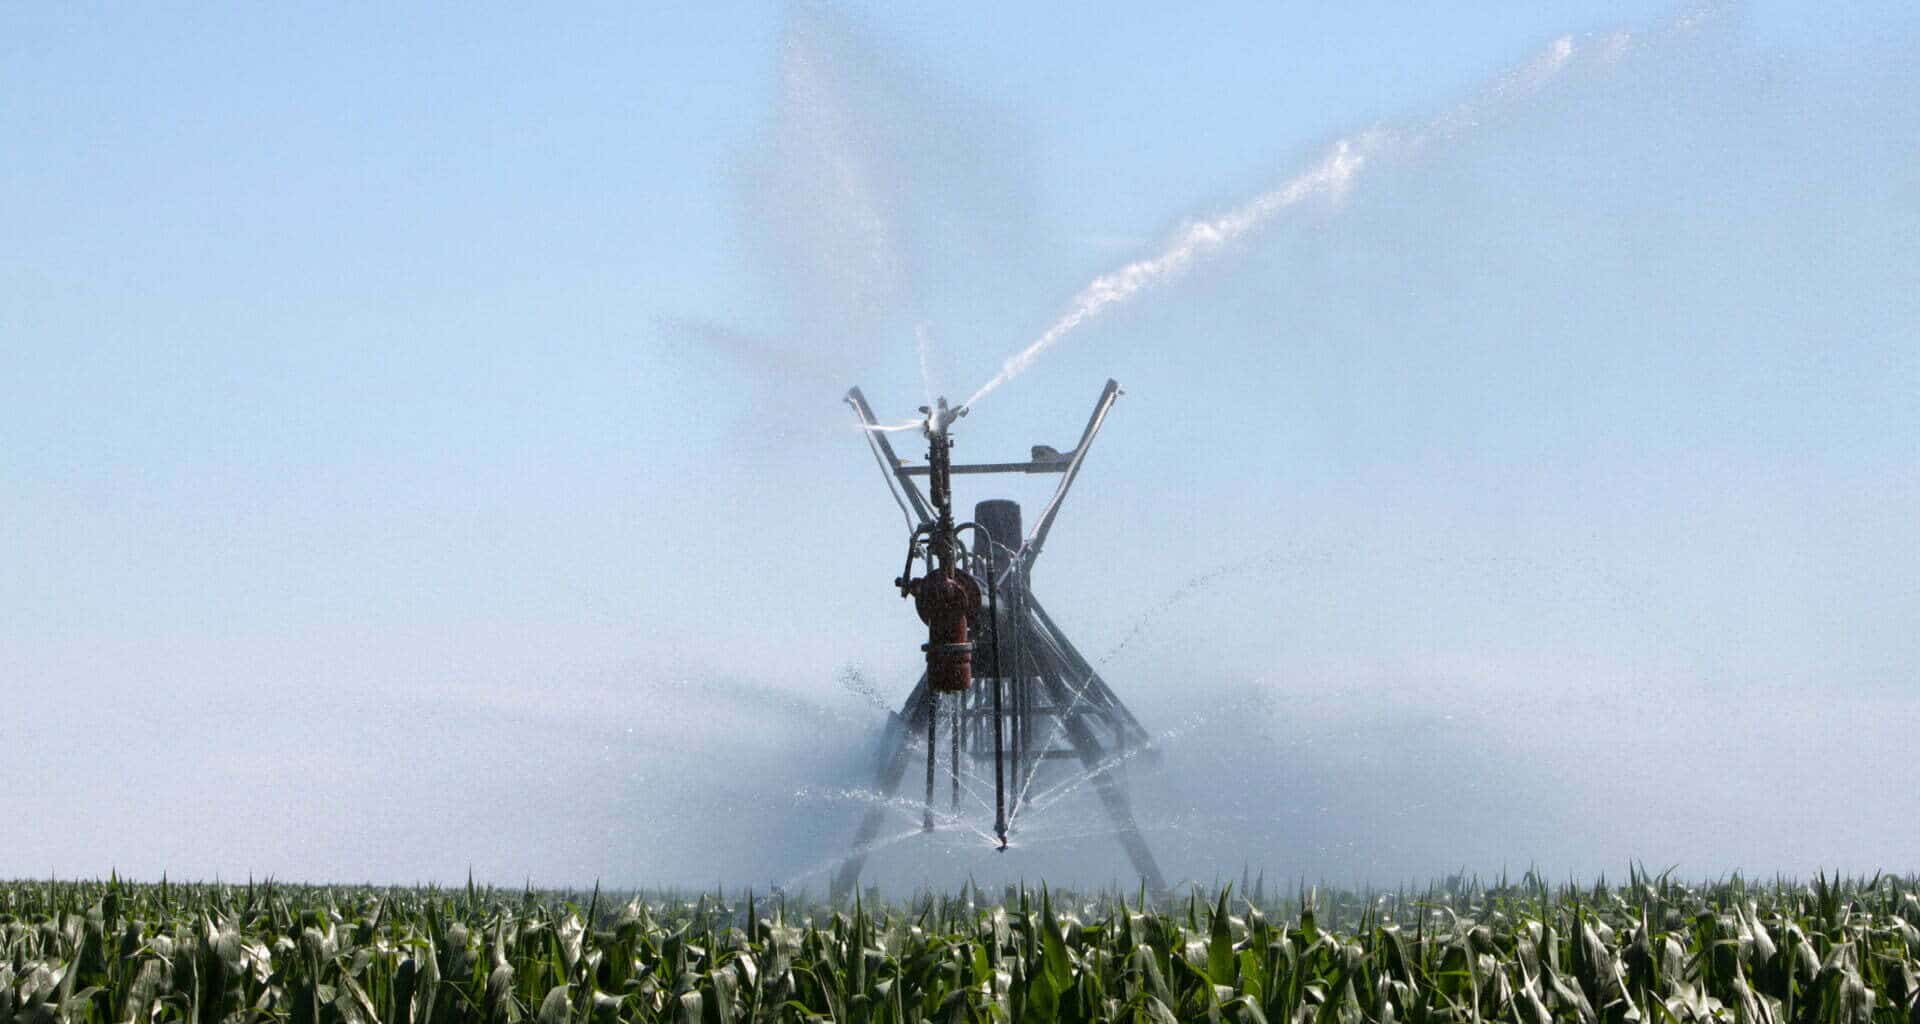 Water is applied to a cornfield via an irrigation system.